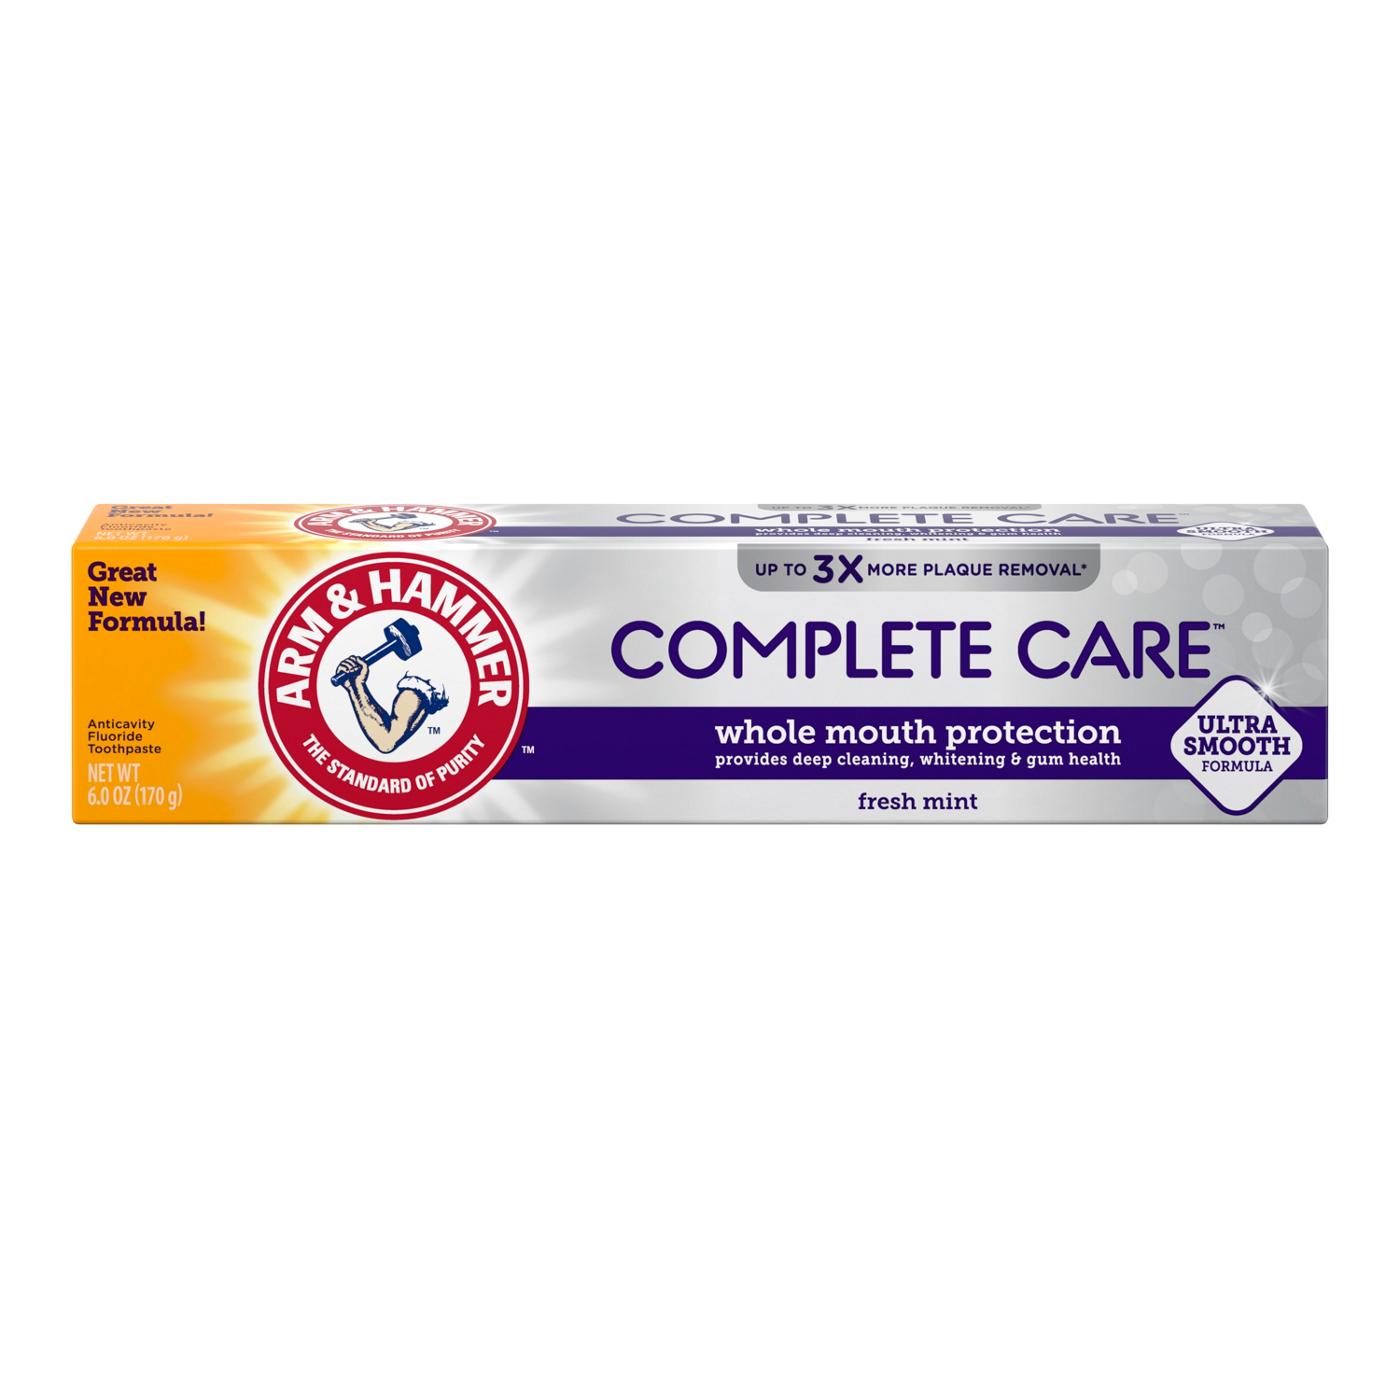 Arm & Hammer Complete Care Anticavity Fluoride Toothpaste – Fresh Mint; image 1 of 2